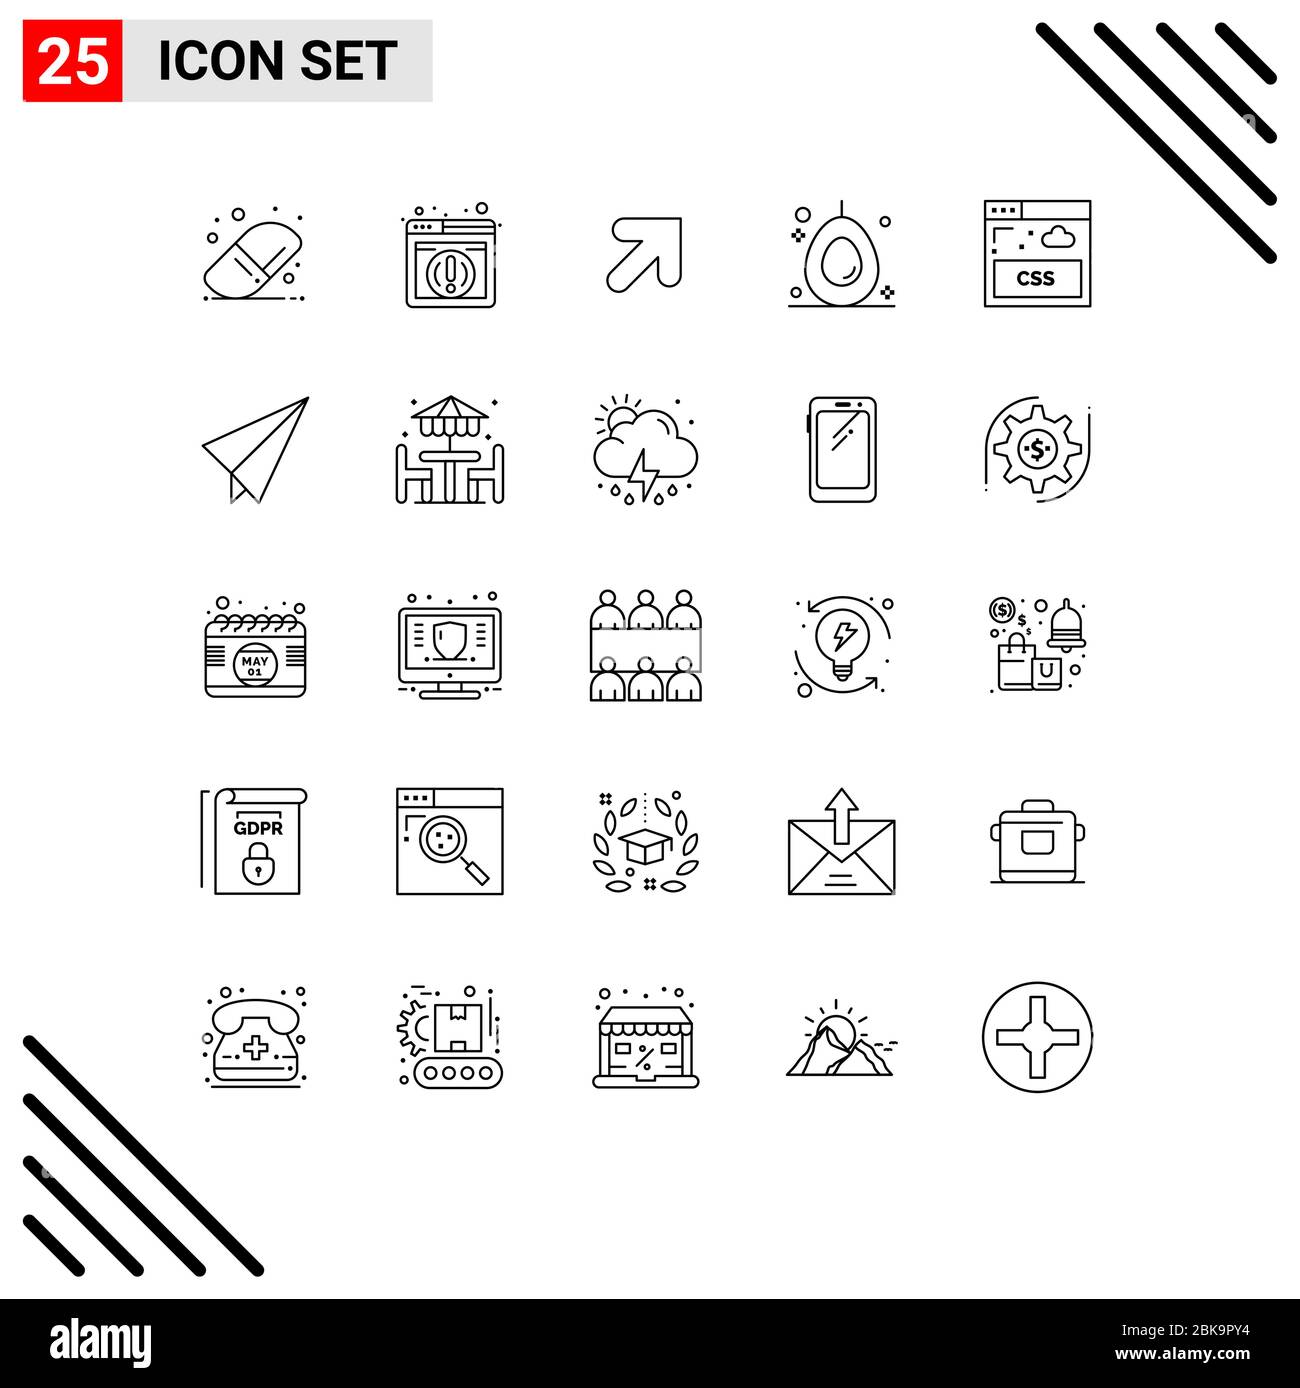 Modern Set of 25 Lines and symbols such as plane, paper, right, style, internet Editable Vector Design Elements Stock Vector